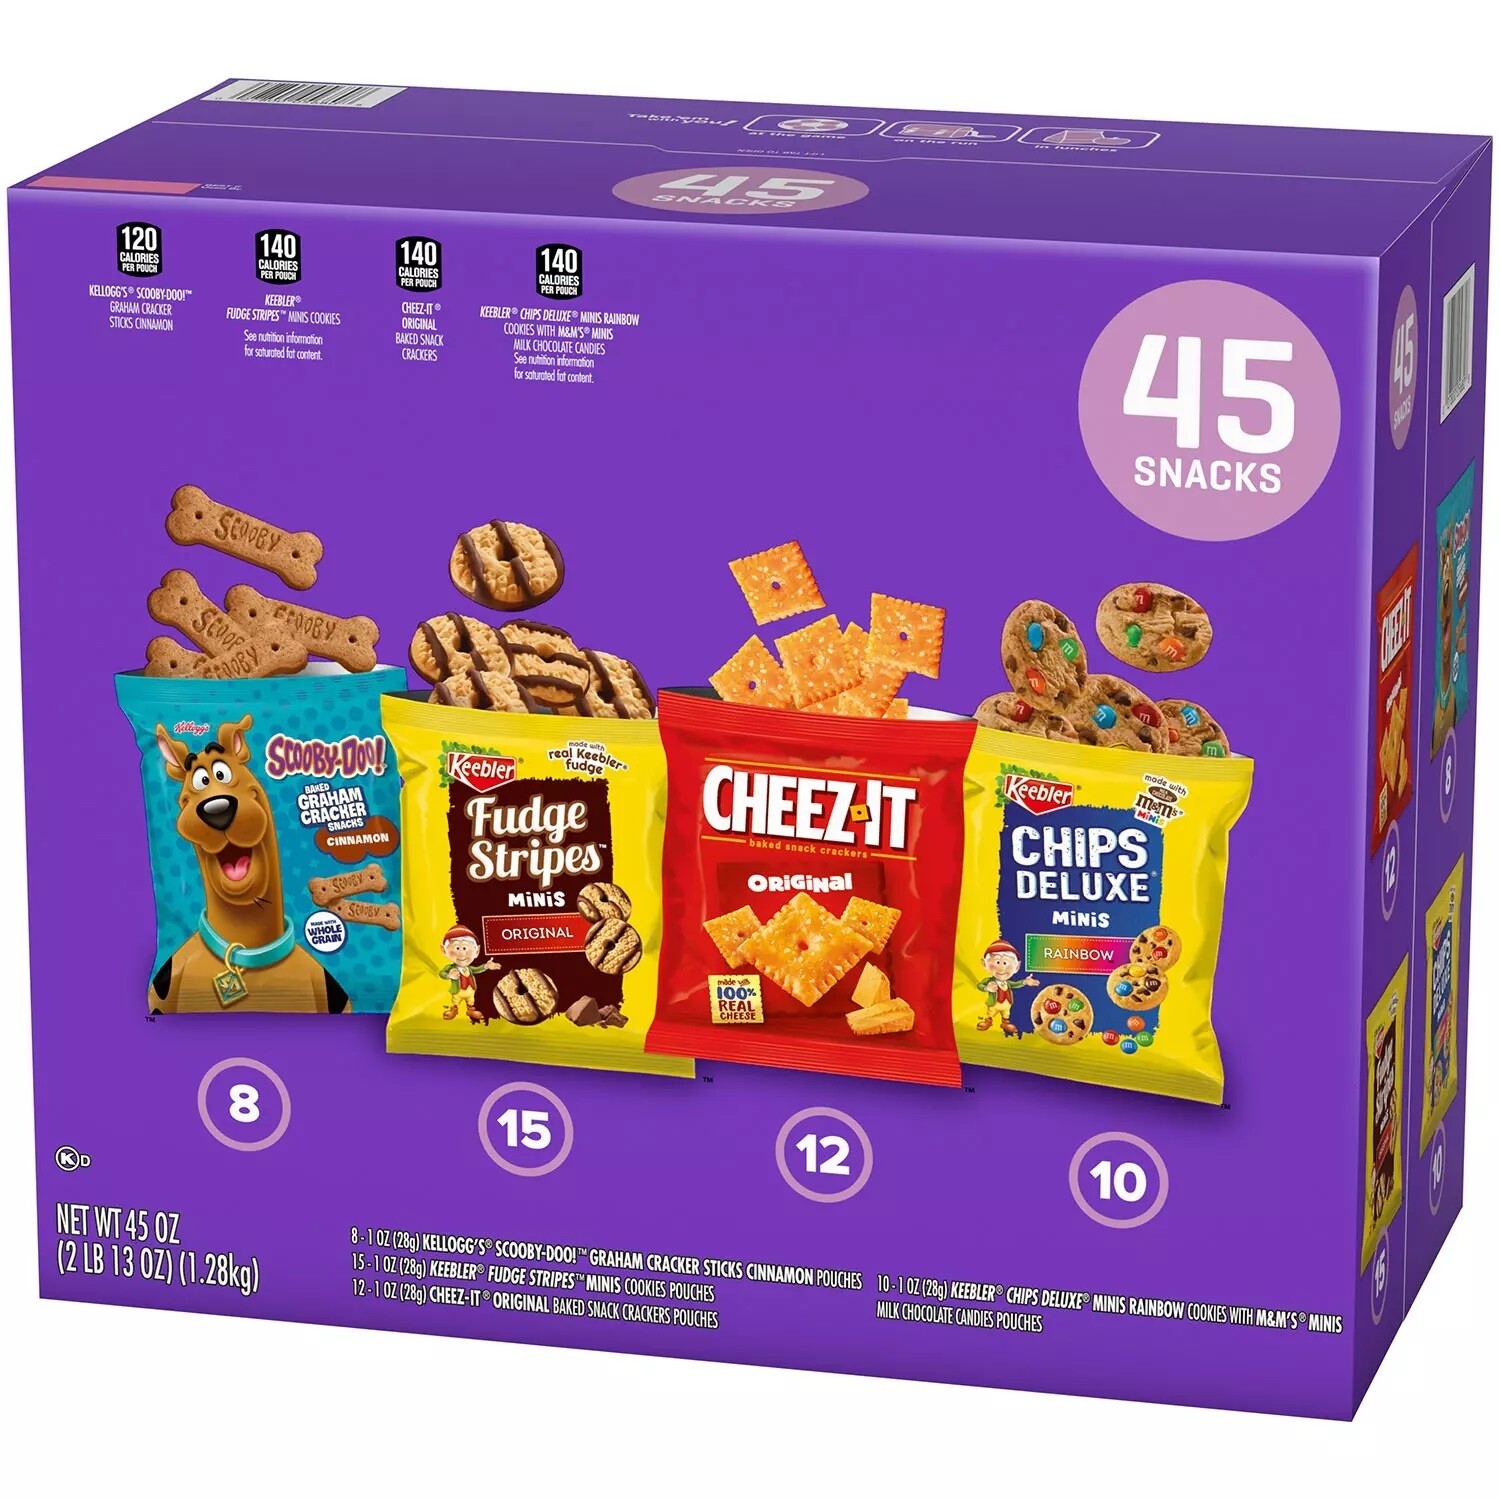 Keebler Snacking Assortment Variety Box 45ct (12 Cheez-it, 10 Chips Deluxe, 15 Fudge Stripes minis, 8 Scooby Doo Graham Cracker Snacks)